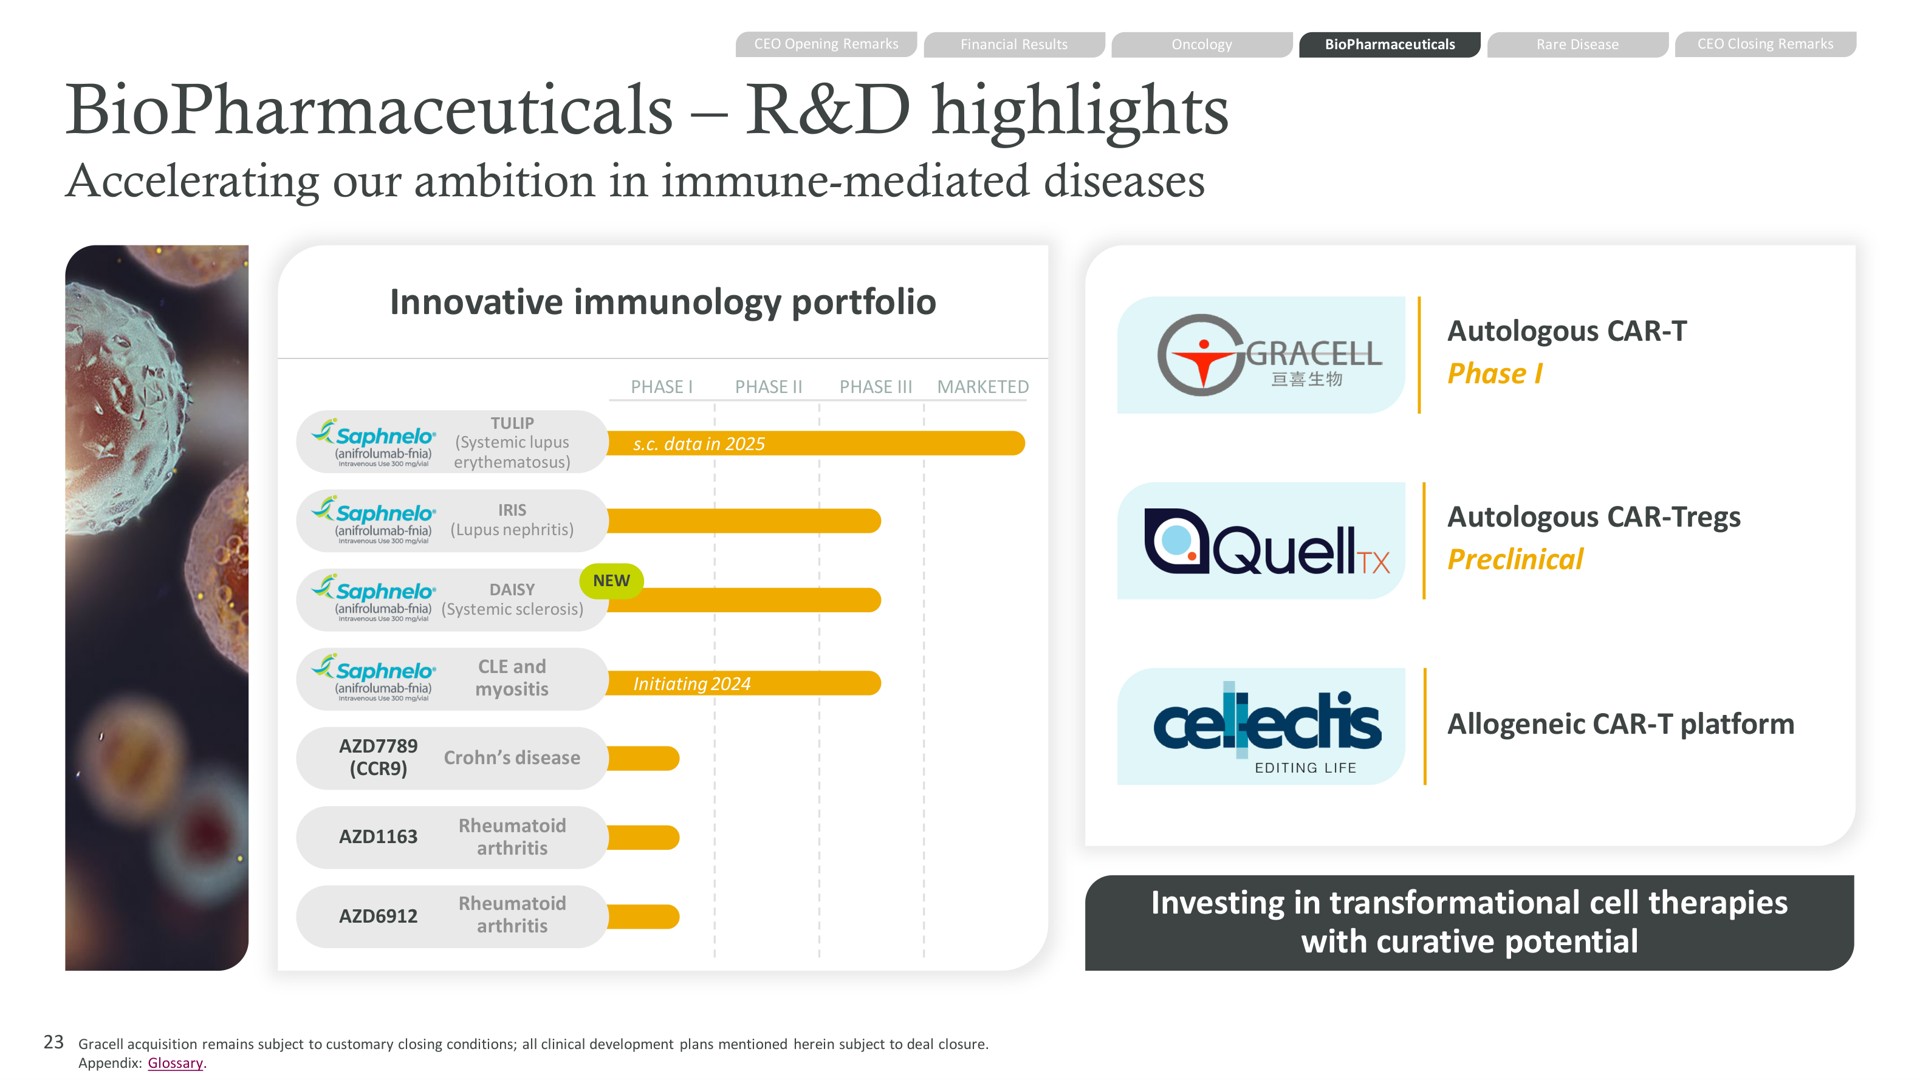 highlights accelerating our ambition in immune mediated diseases innovative immunology portfolio investing in cell therapies with curative potential | AstraZeneca